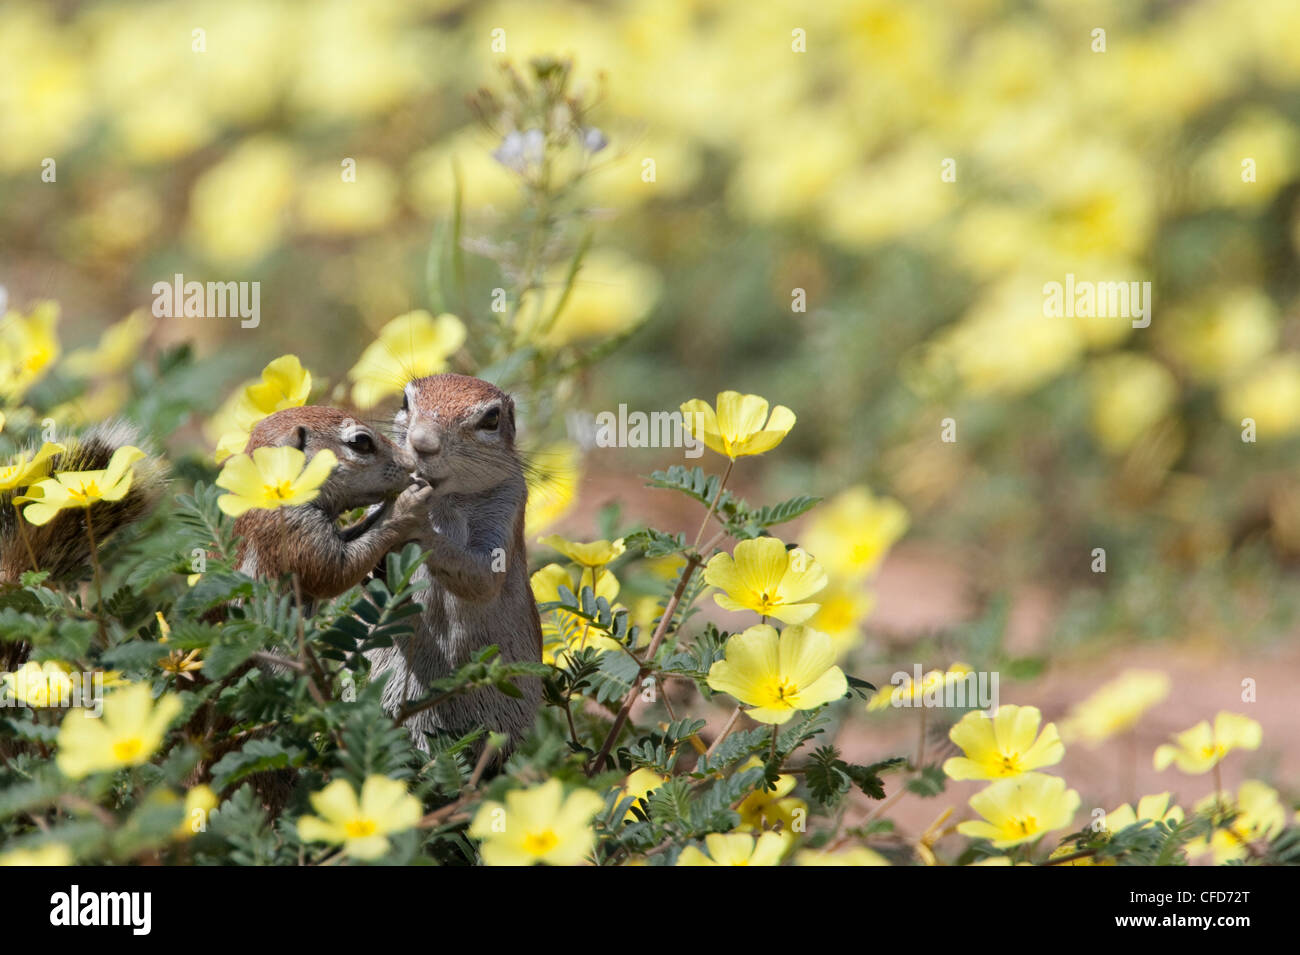 Ground squirrels (Xerus inauris), in devil's thorn flowers, Kgalagadi Transfrontier Park, Northern Cape, South Africa, Africa Stock Photo